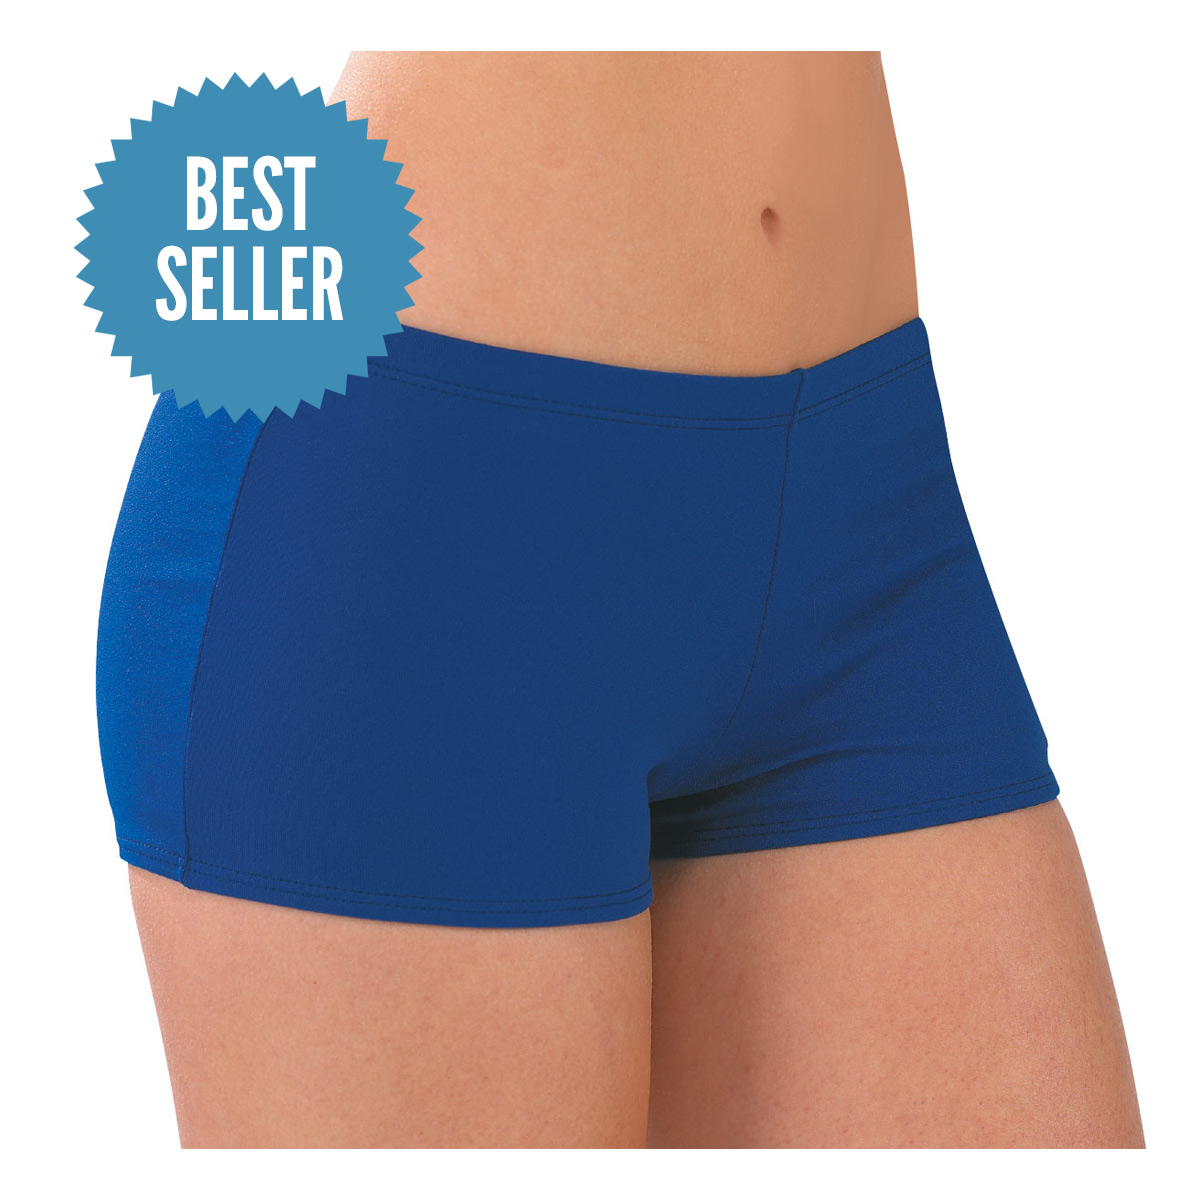 Cheer Details about   200 Body Wrappers Athletic Brief 